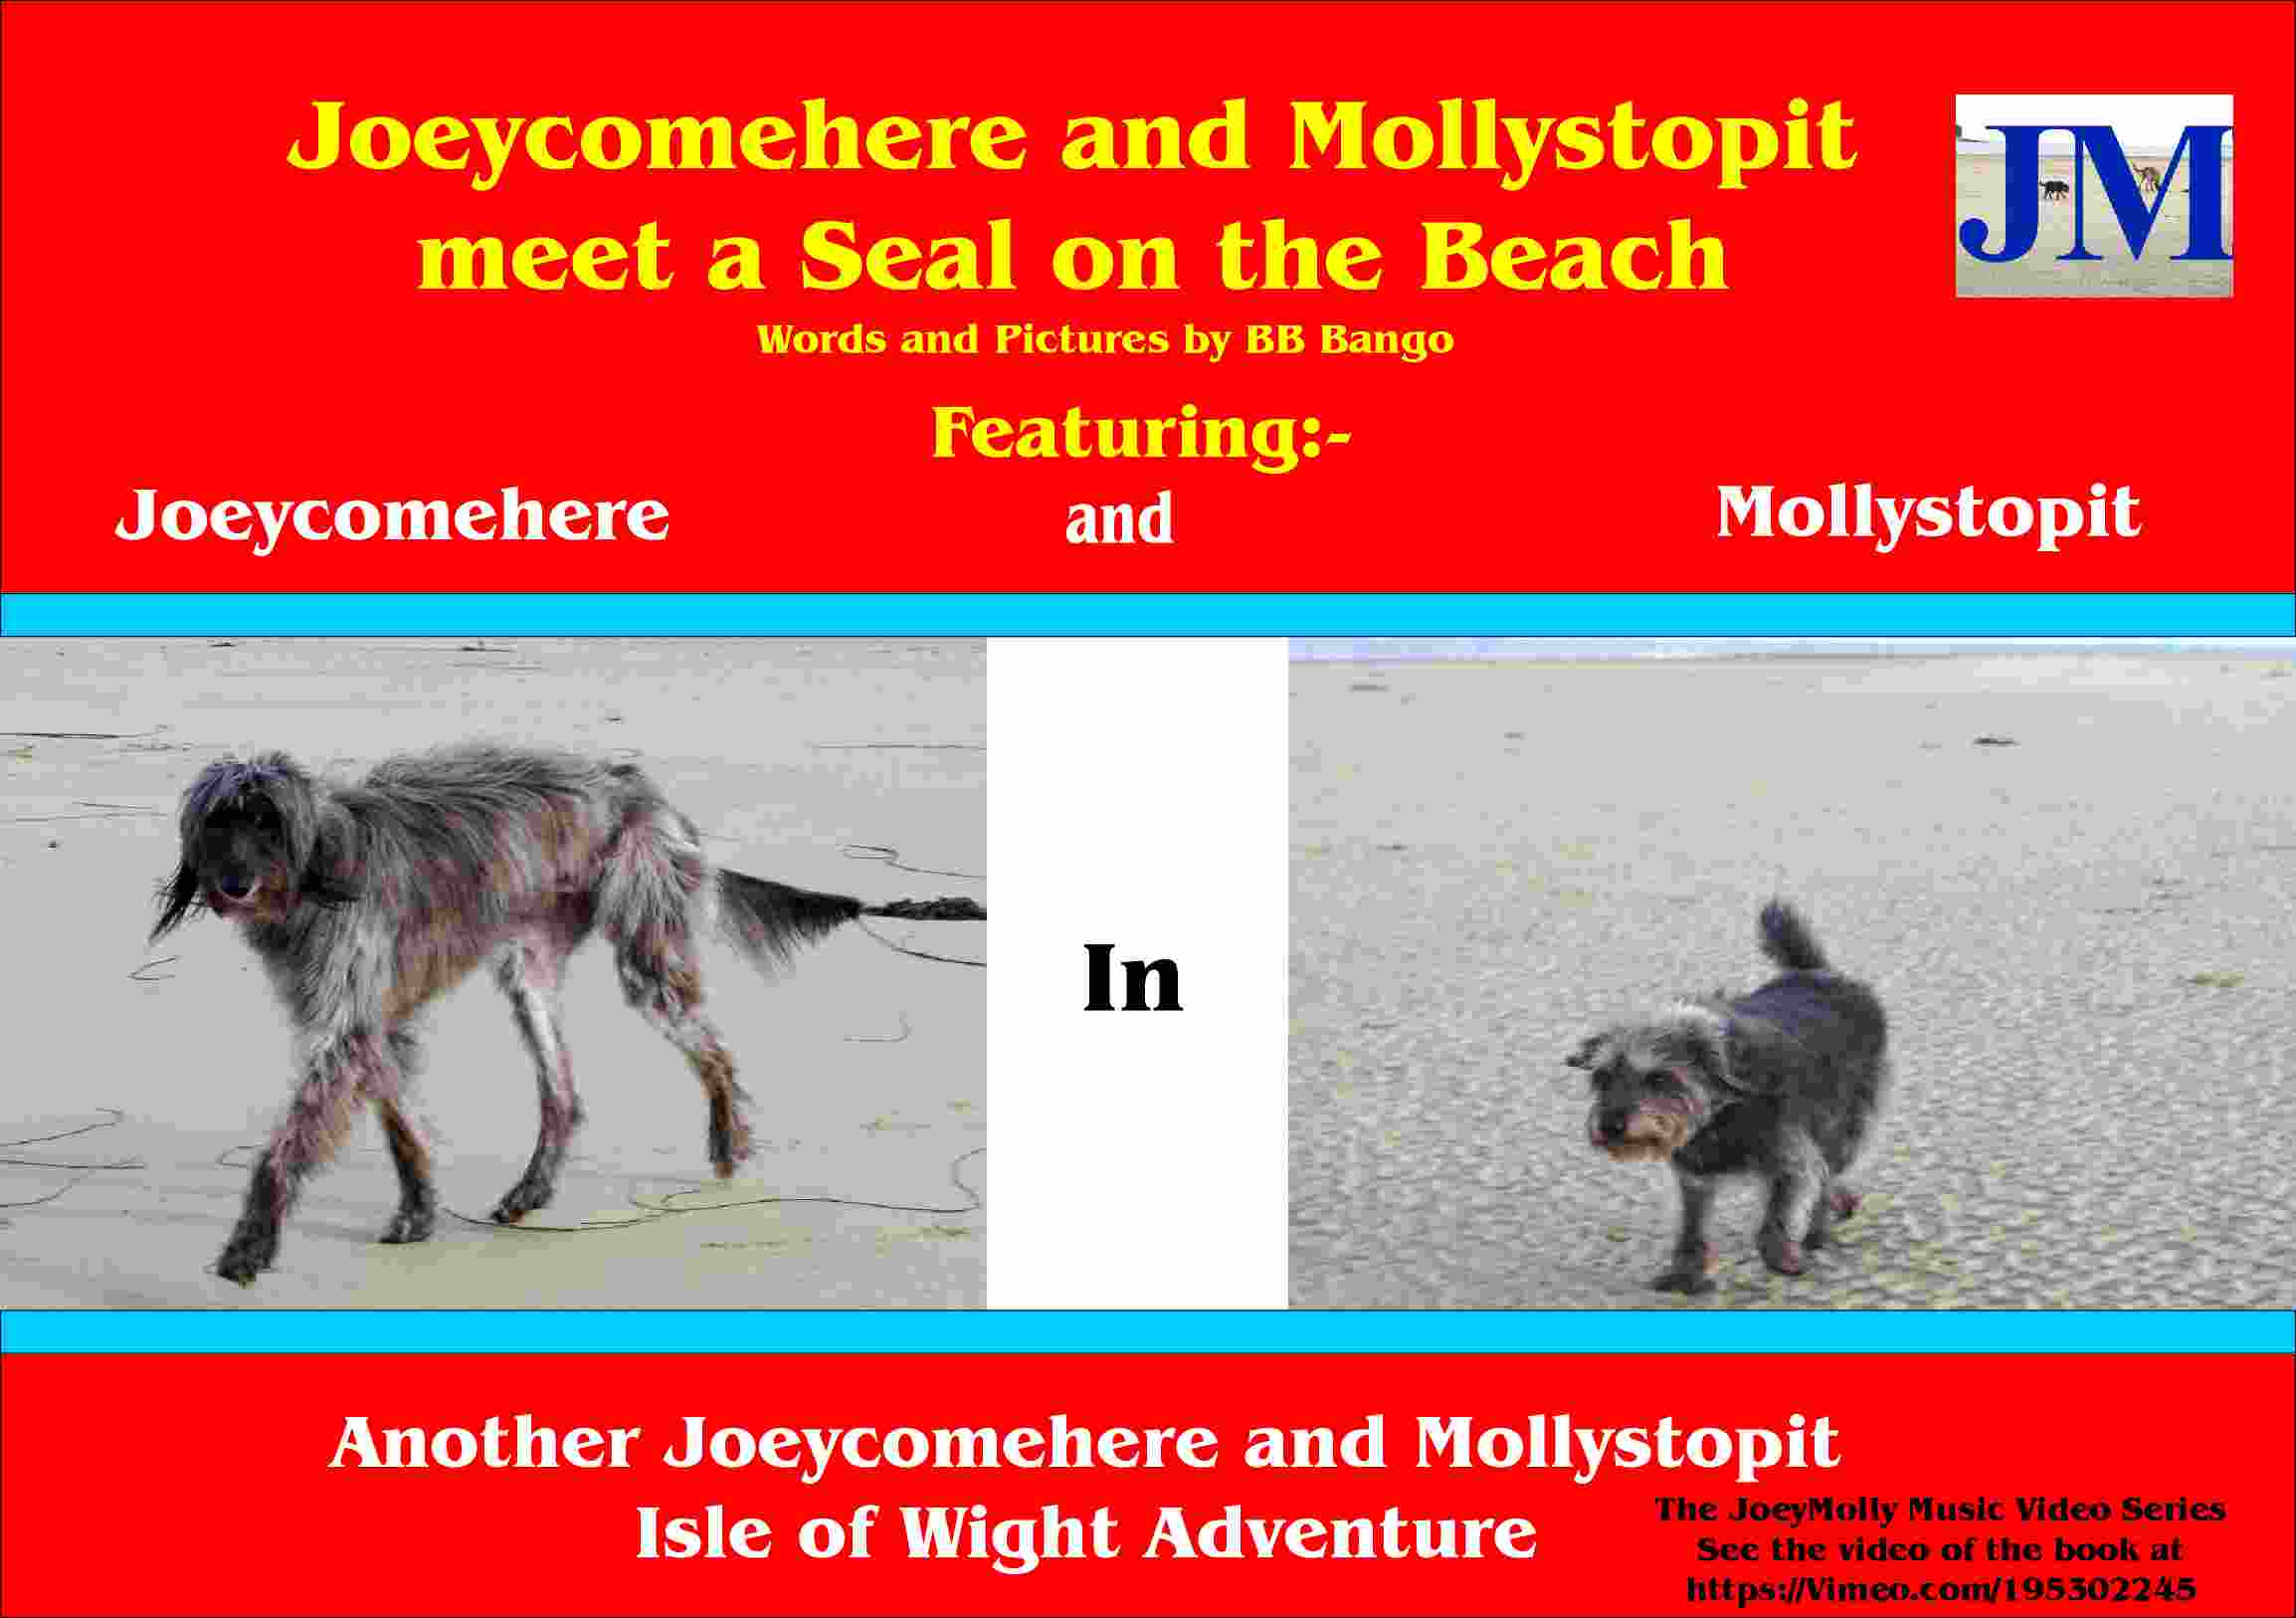 Now available on Kindle. Joeycomehere and Mollystopit meet a seal on the beach. Part of a series of Wight Adventures written by BB Bango and published by ClayClay. Copies of book in  A5 format available direct from the ClayClay Shop  This 3rd book  is also a music video